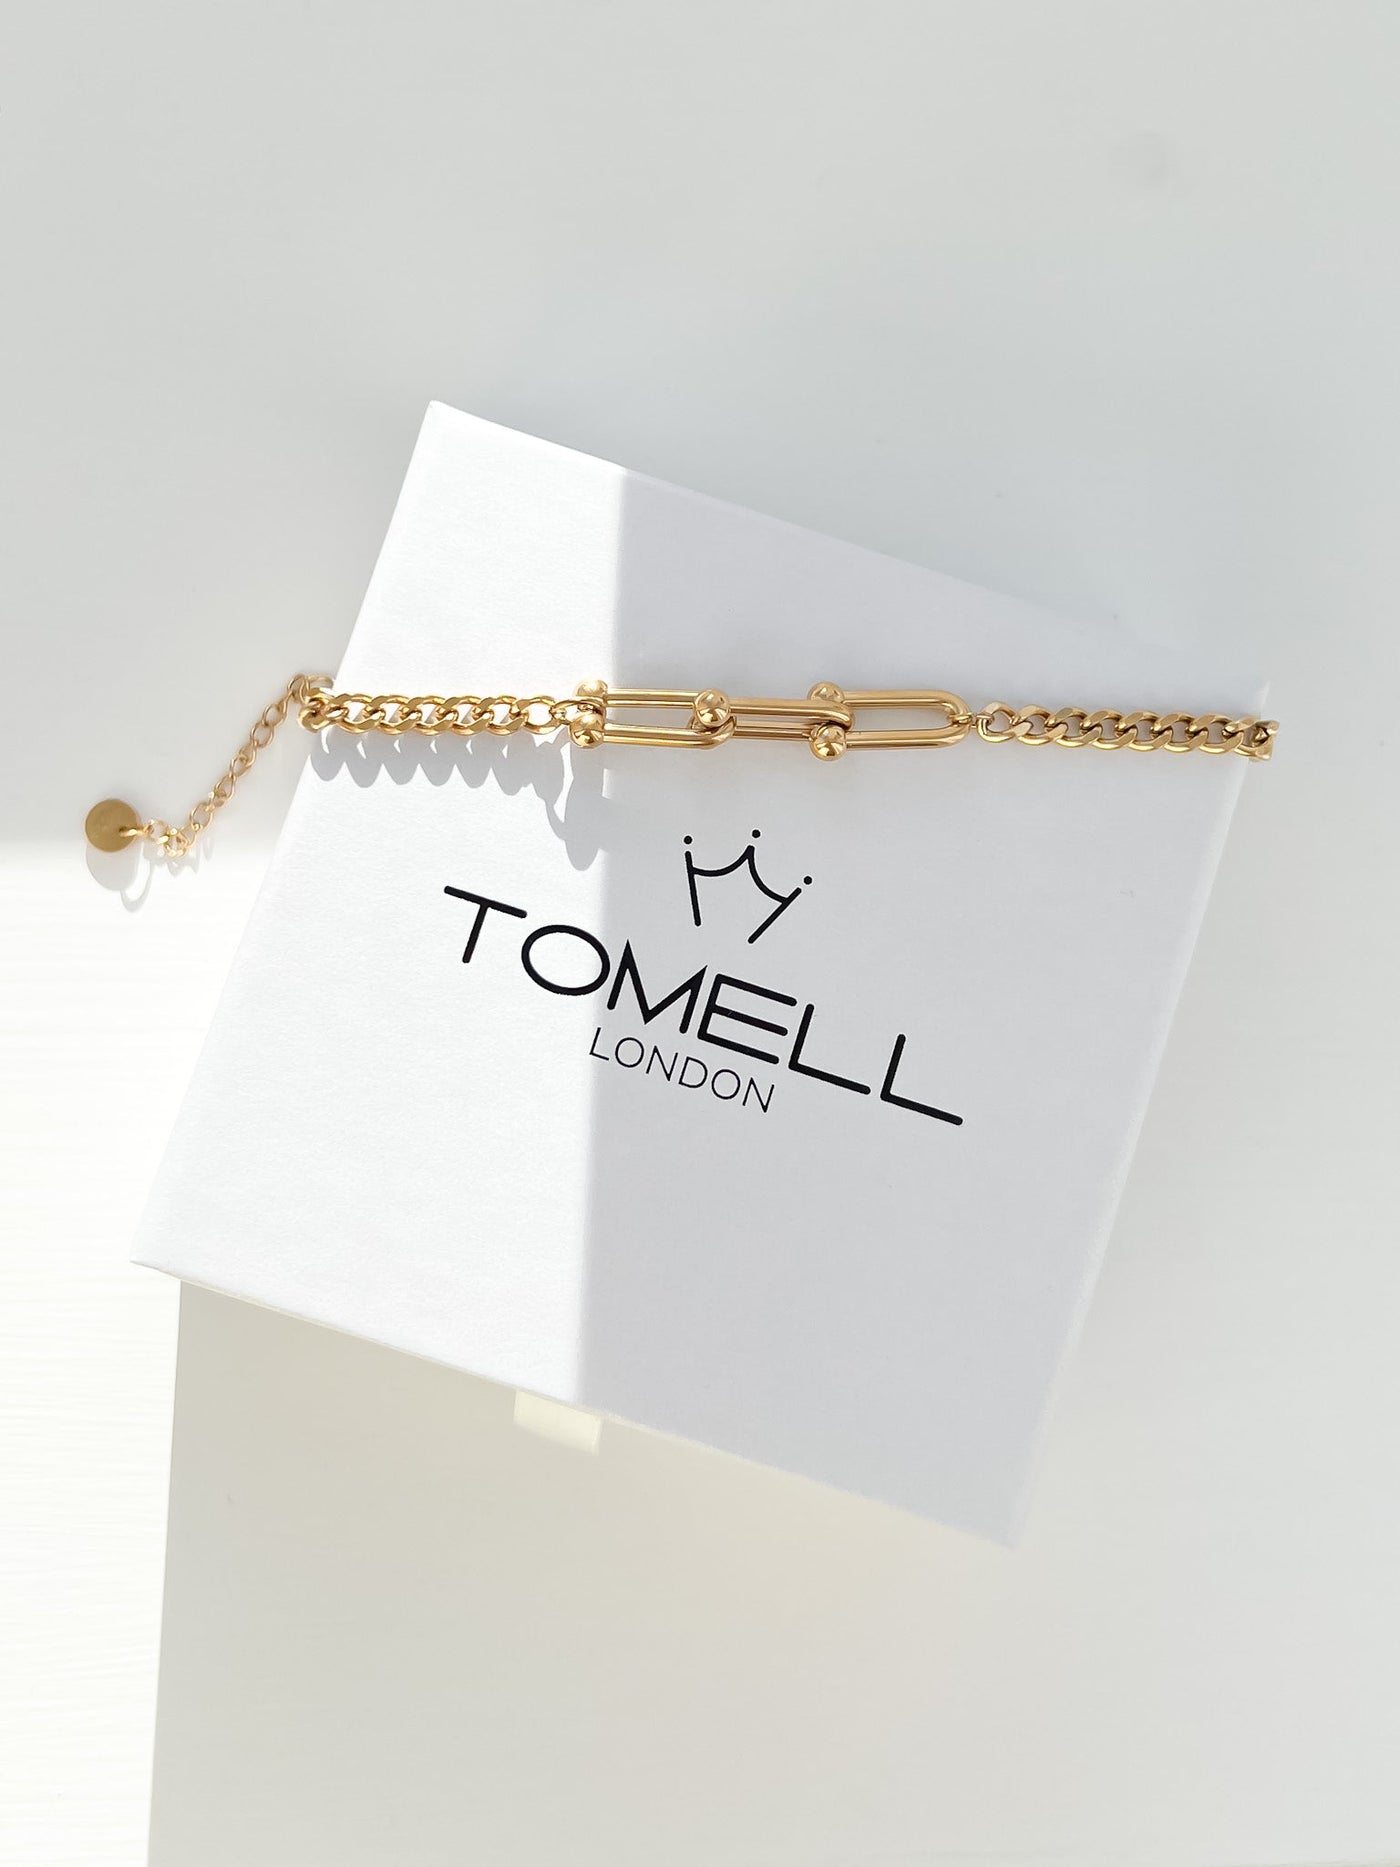 TWISTED | GOLD - Tomell London